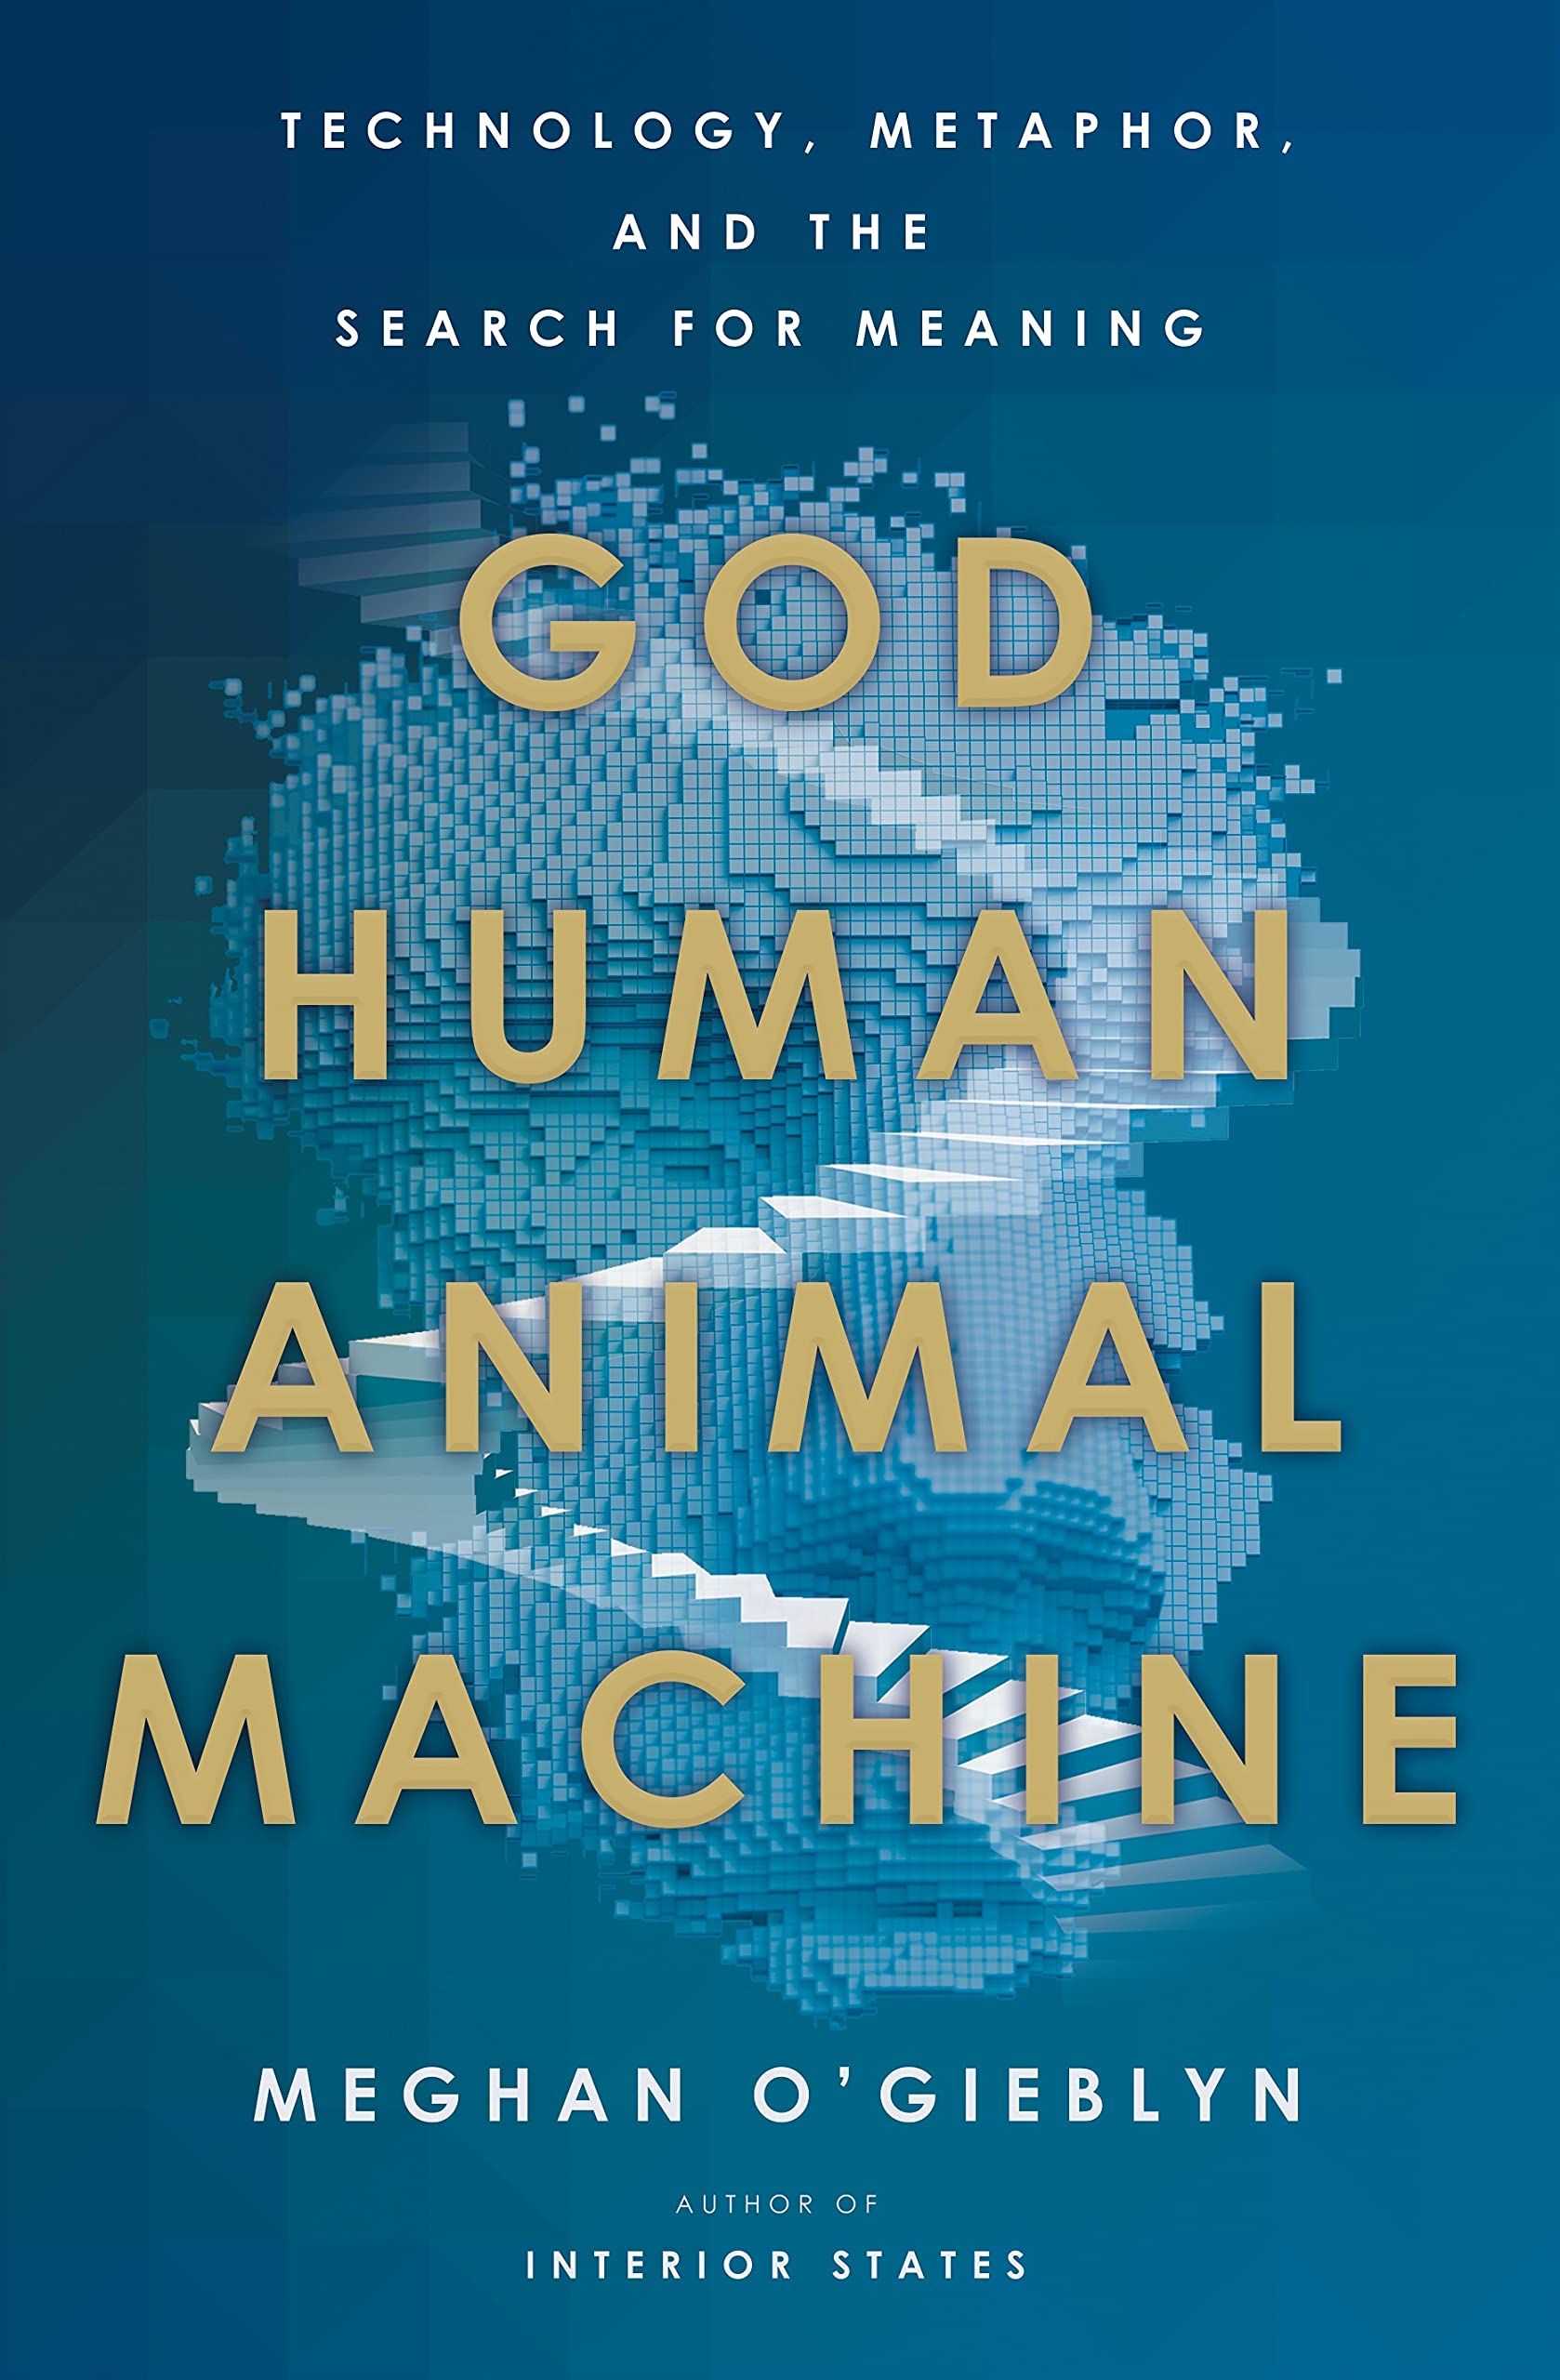 Cover of God, Human, Animal, Machine: Technology, Metaphor, and the Search for Meaning